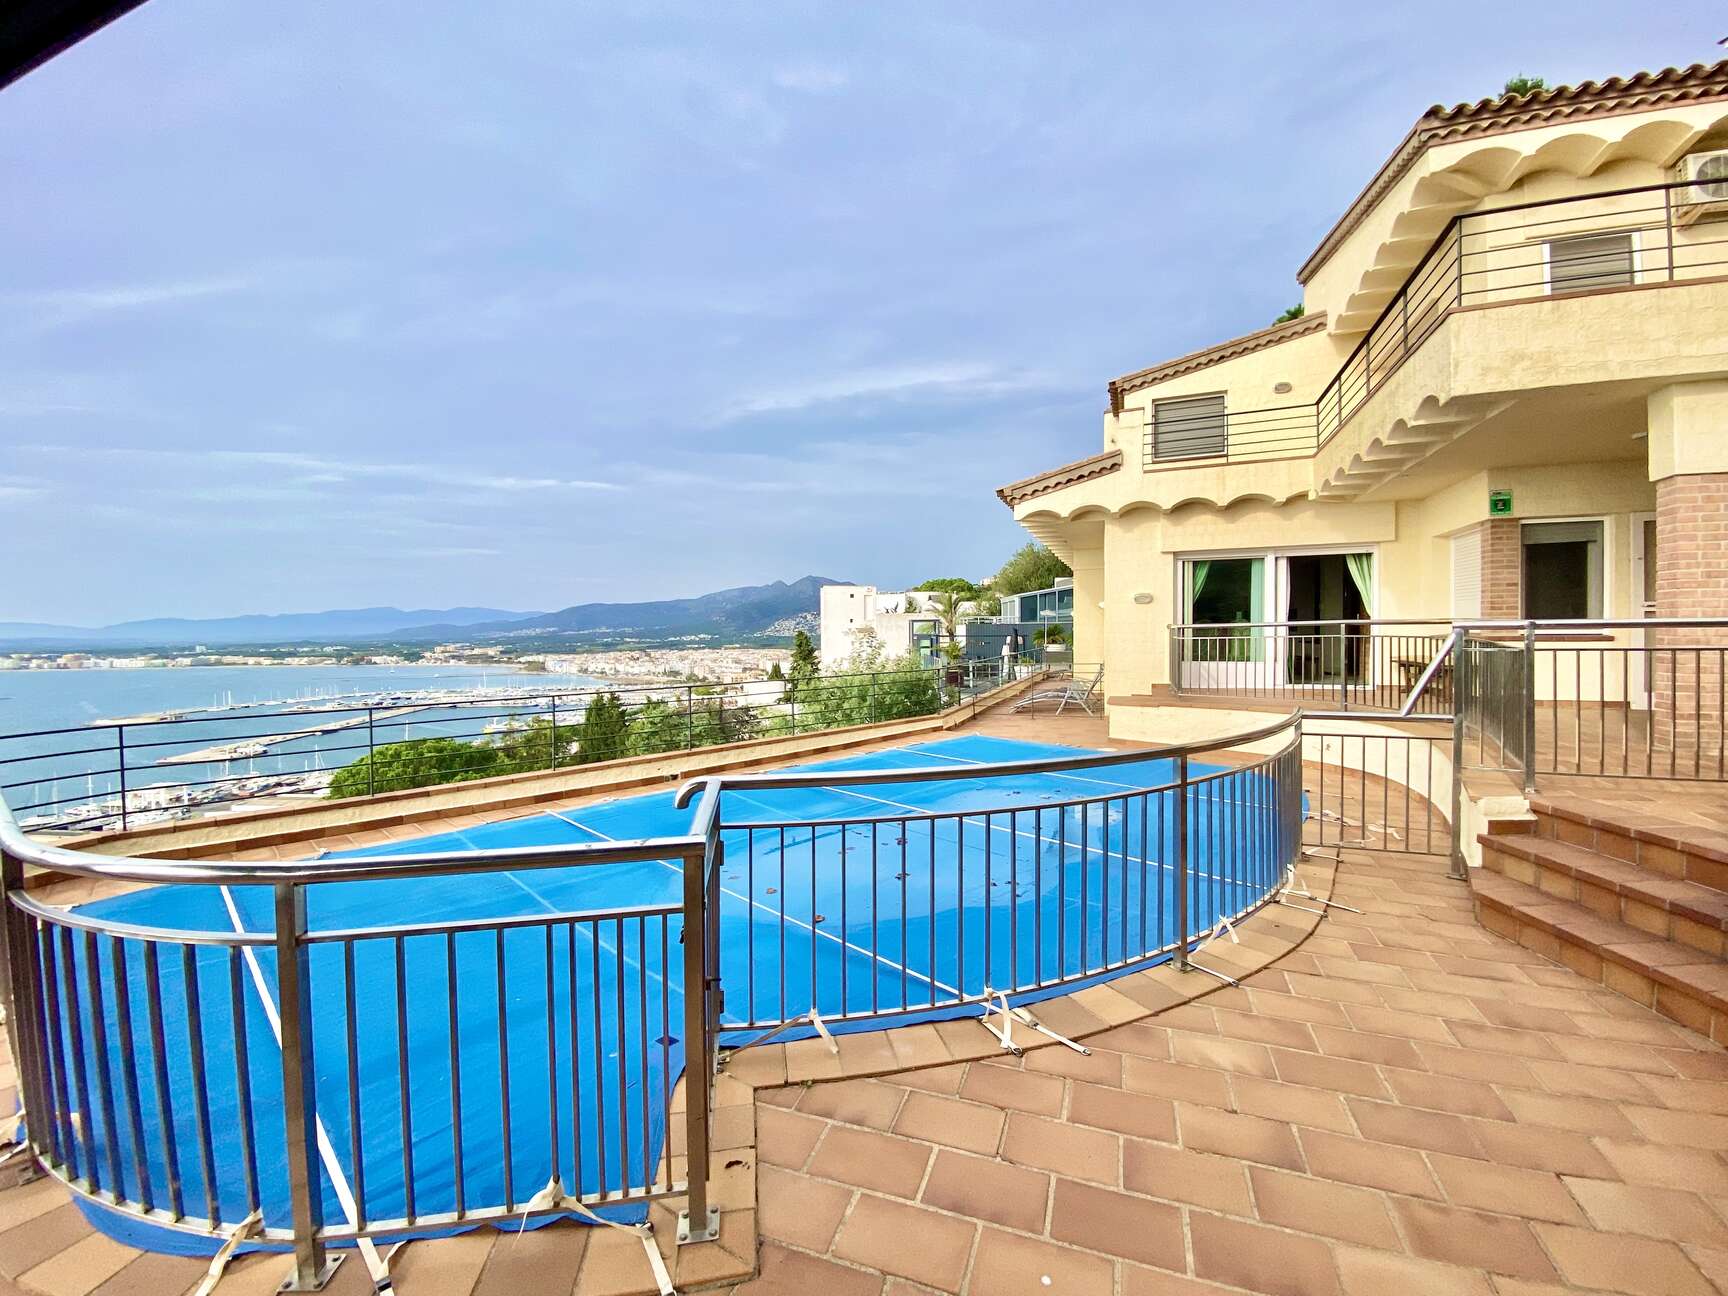 Breathtaking sea view! Beautiful villa with tourist license for sale in Roses. A unique opportunity!